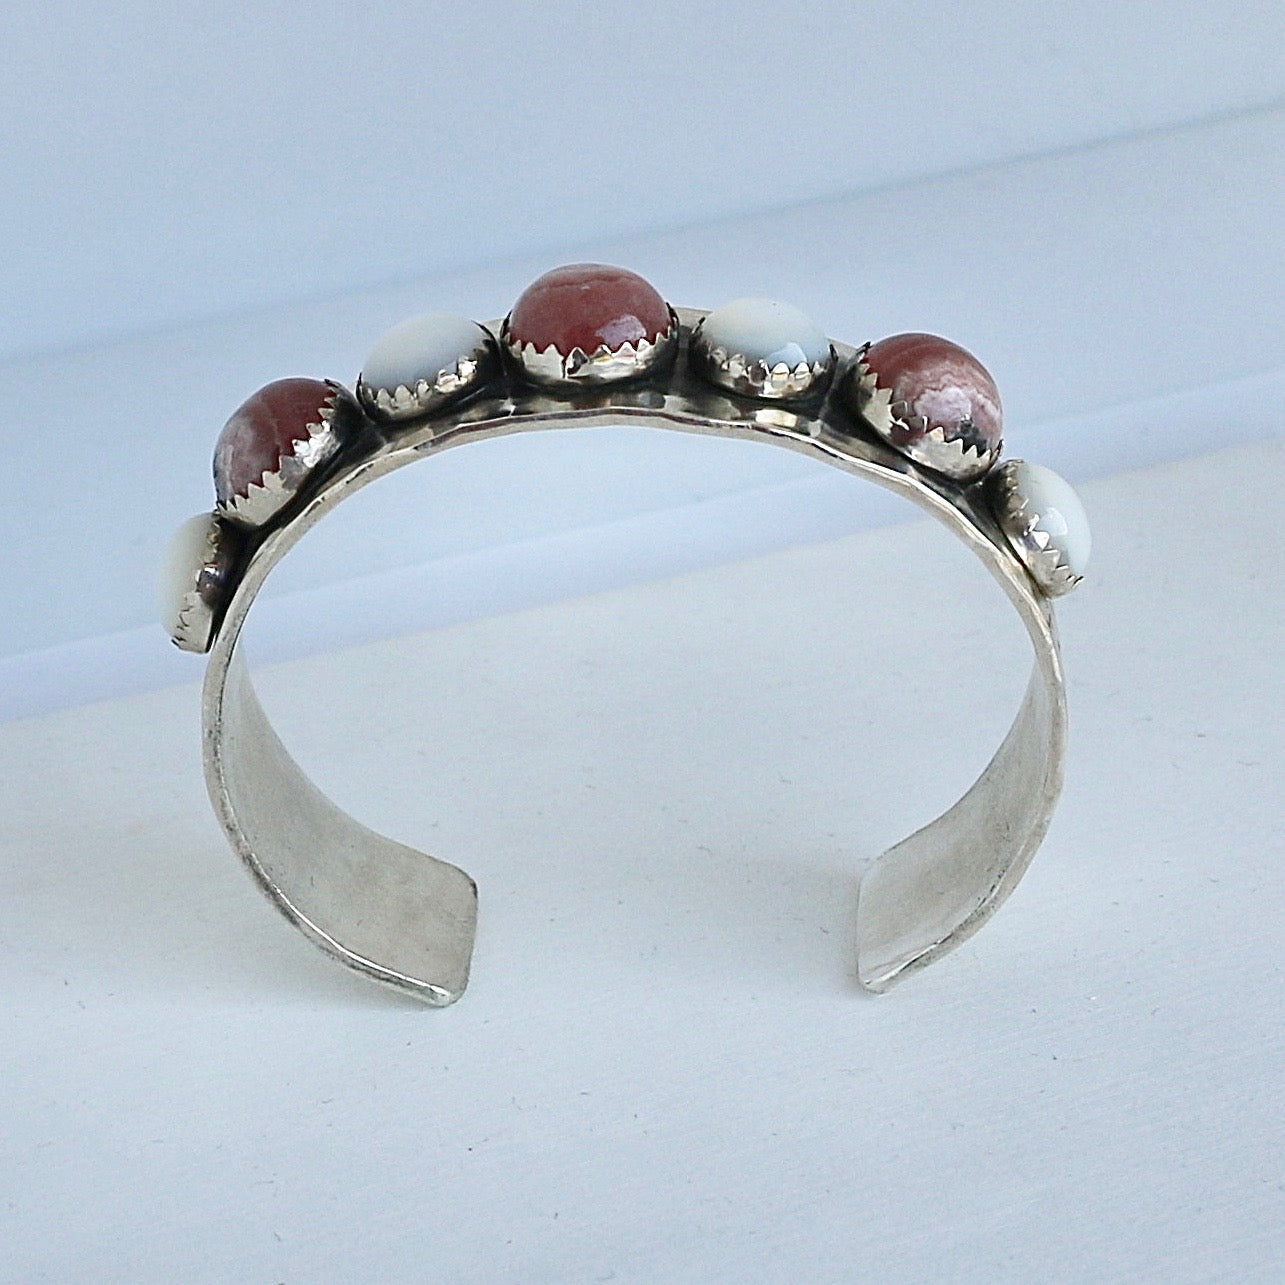 3/4” Cuff with Mother of Pearl and Pink Rhodochrosite Cuffs Richard Schmidt   